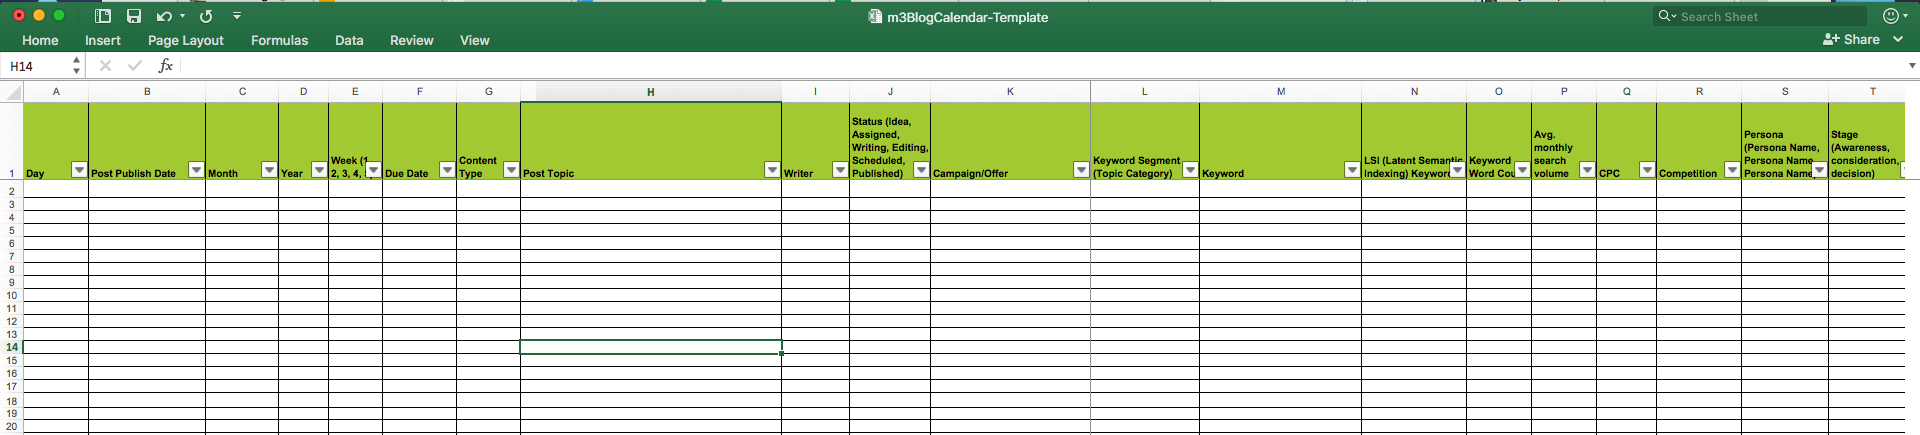 Editorial Calendar Templates For Content Marketing: The Ultimate List within Content Marketing Calendar Template